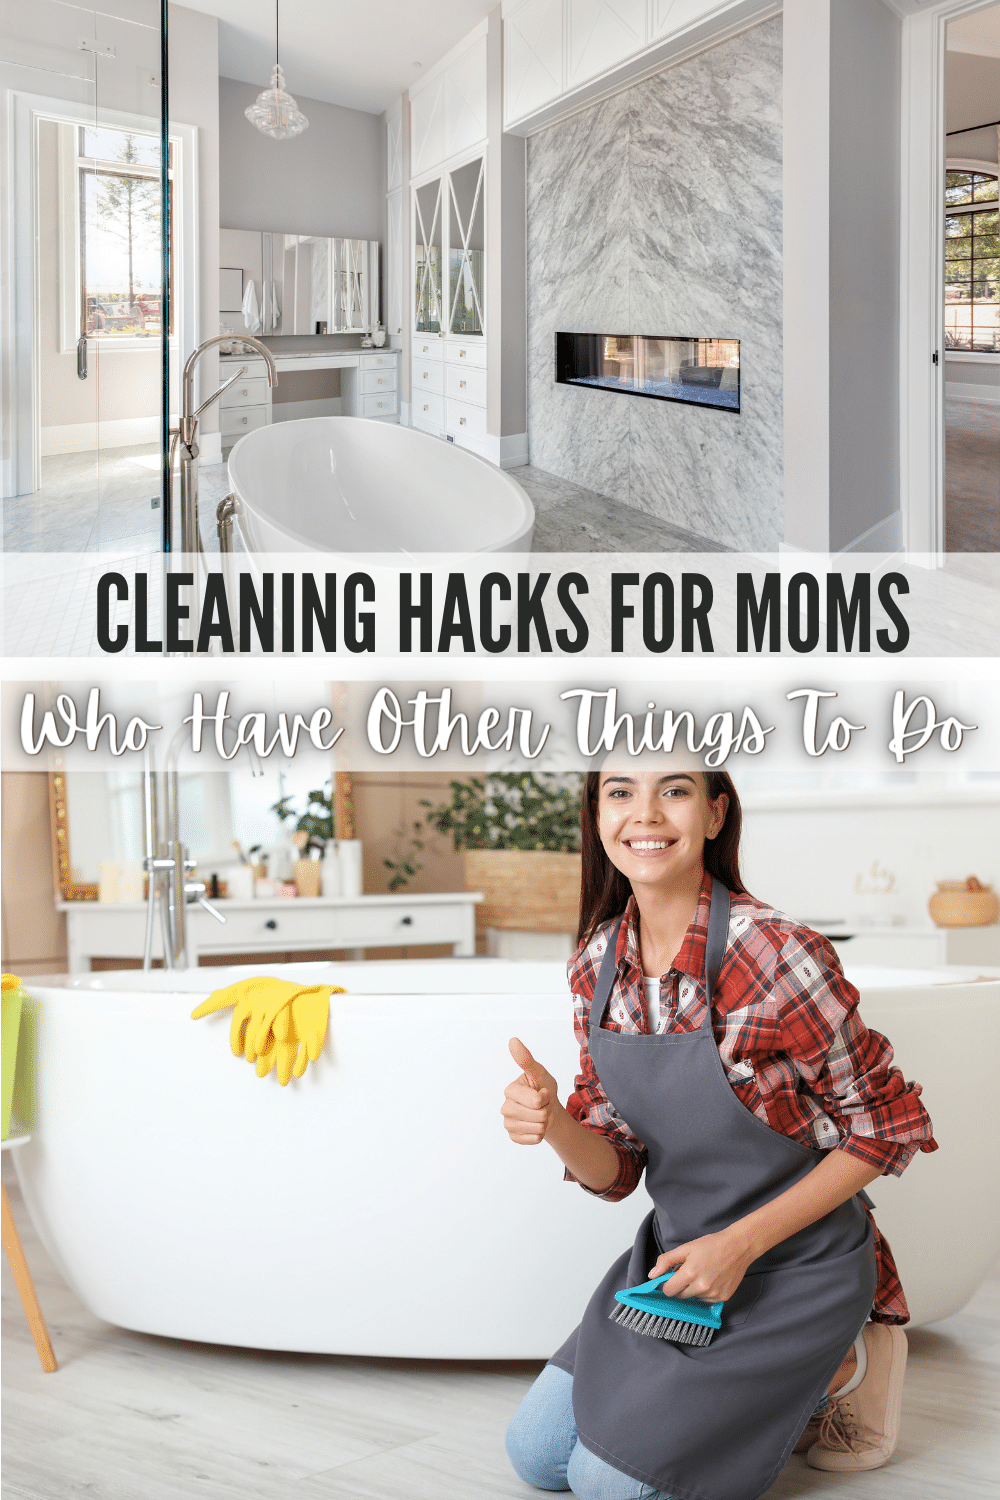 Cleaning hacks for moms that make some of the toughest, most dreaded cleaning tasks MUCH easier and using items that are already on hand. #cleaninghacks #cleaning #momlife #cleaningtips via @wondermomwannab